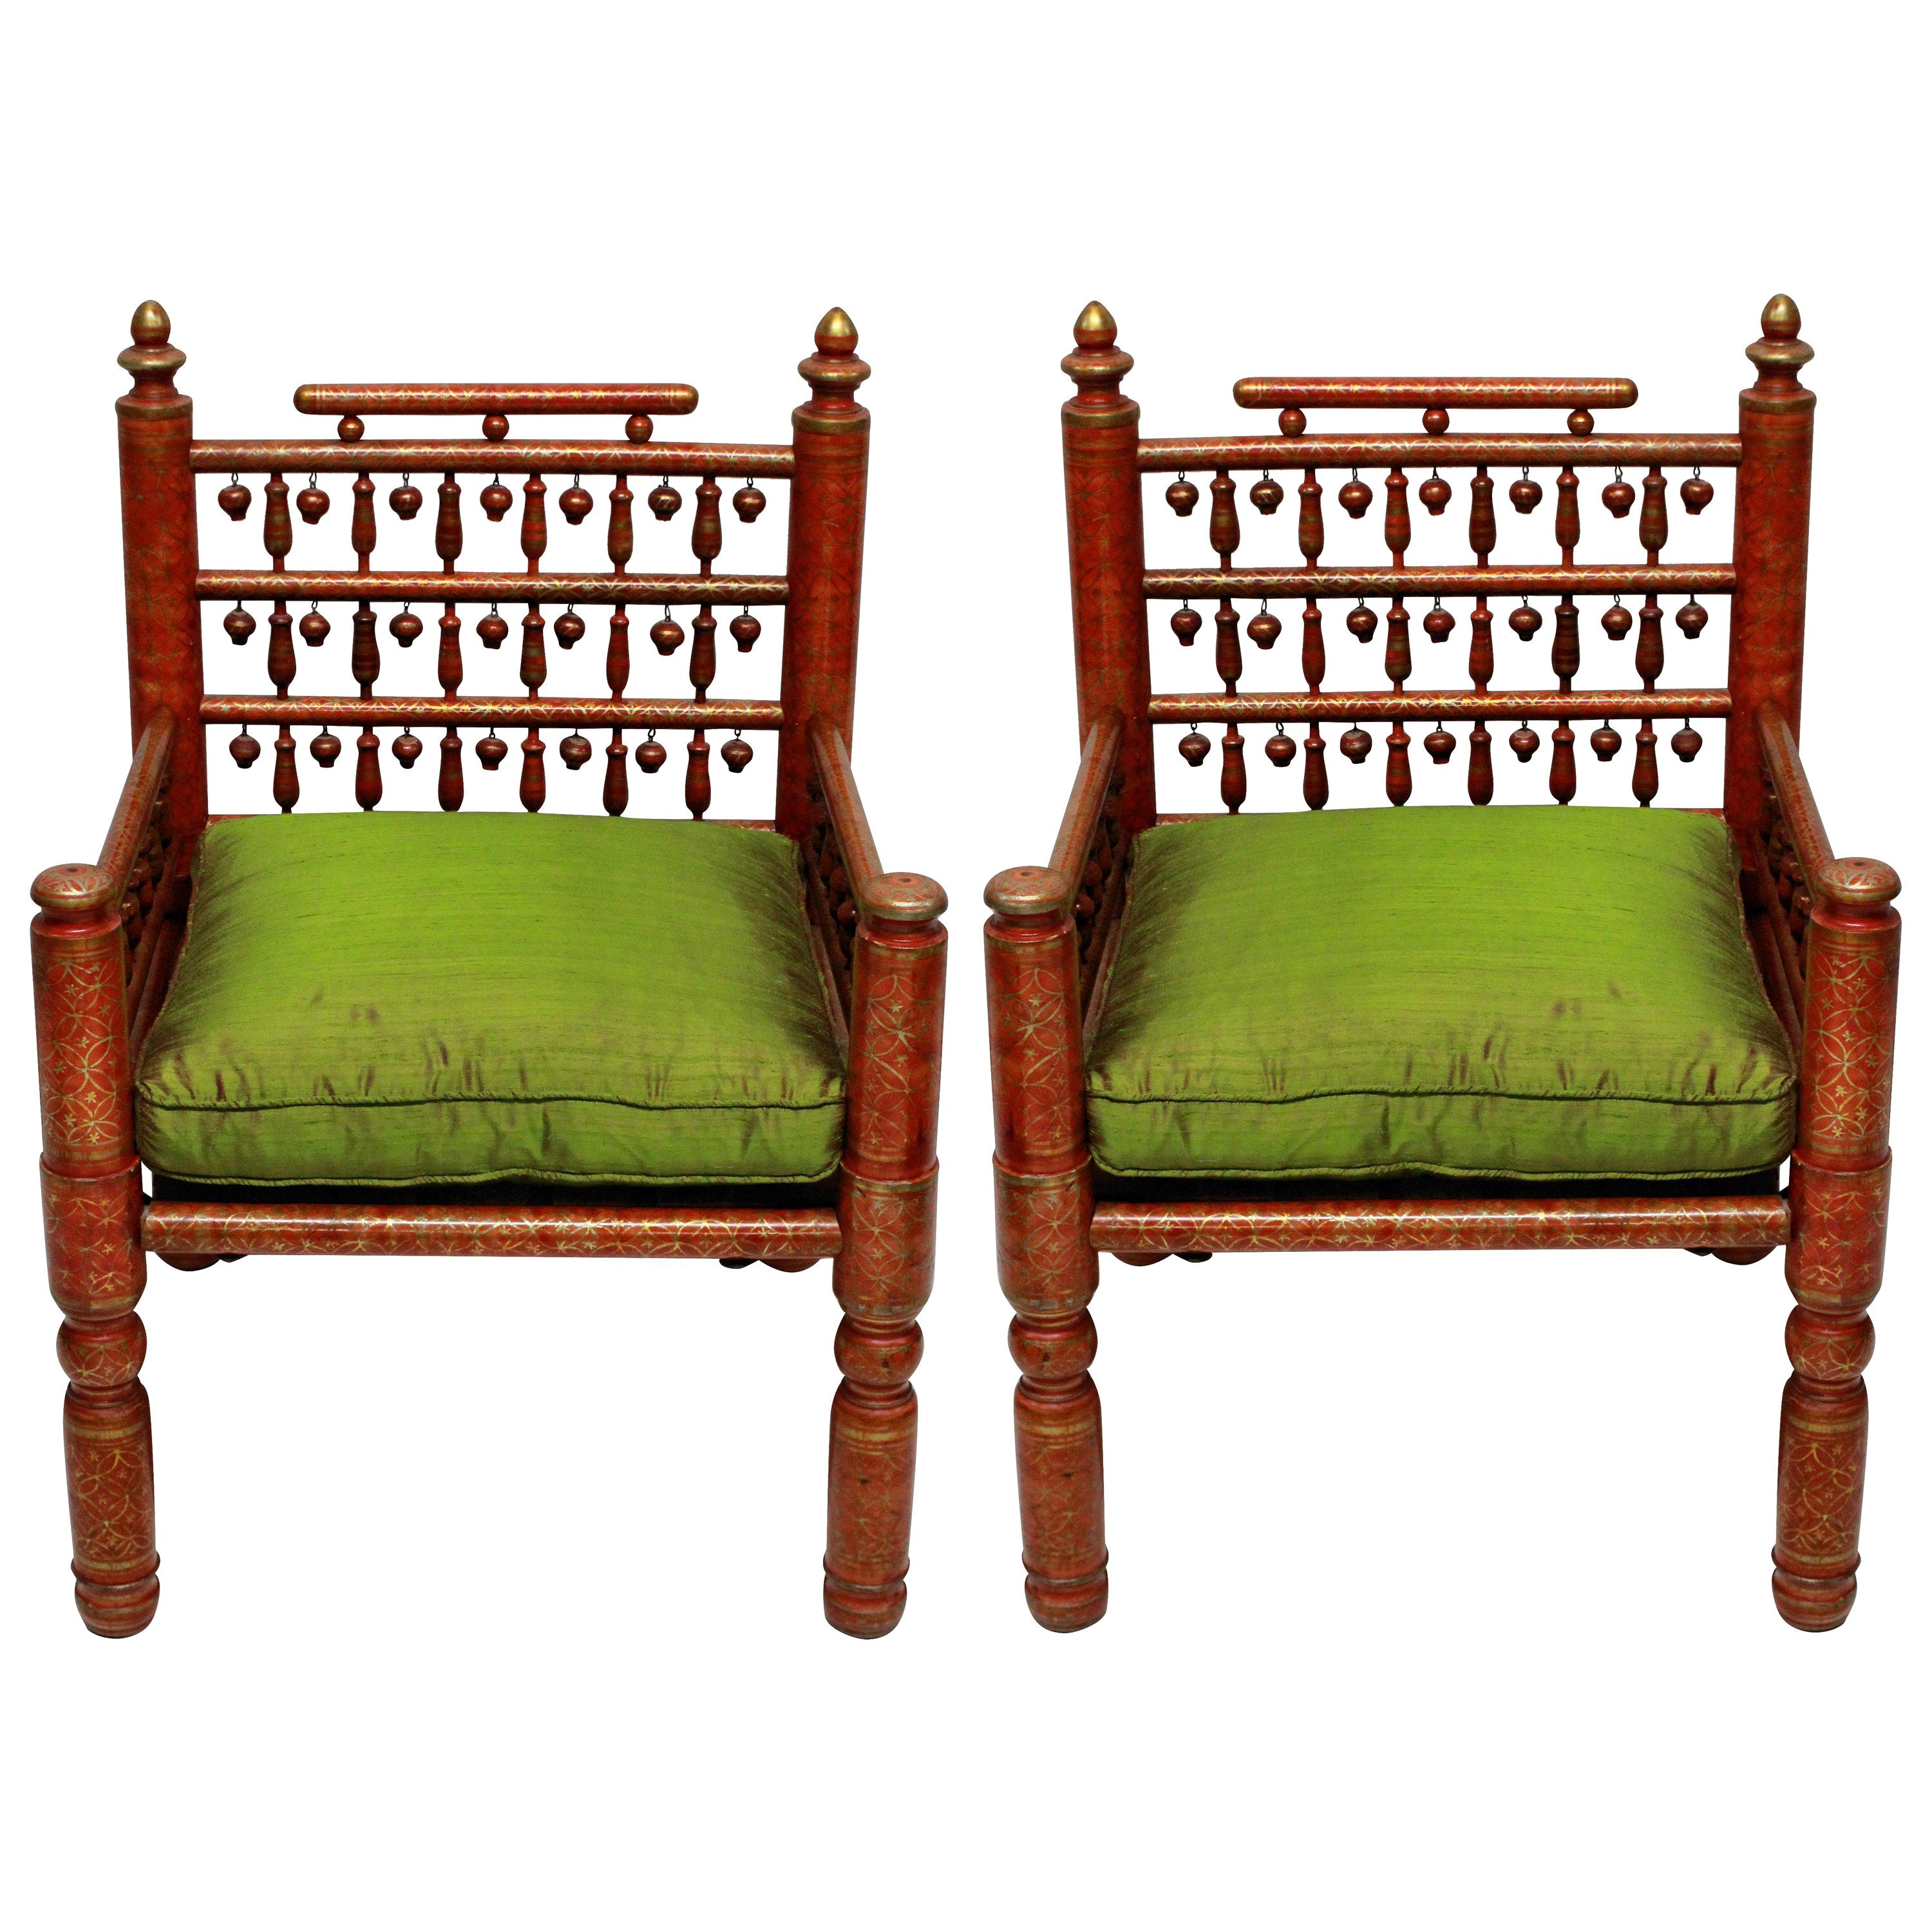 Pair of Red Lacquered Punjabi Chairs